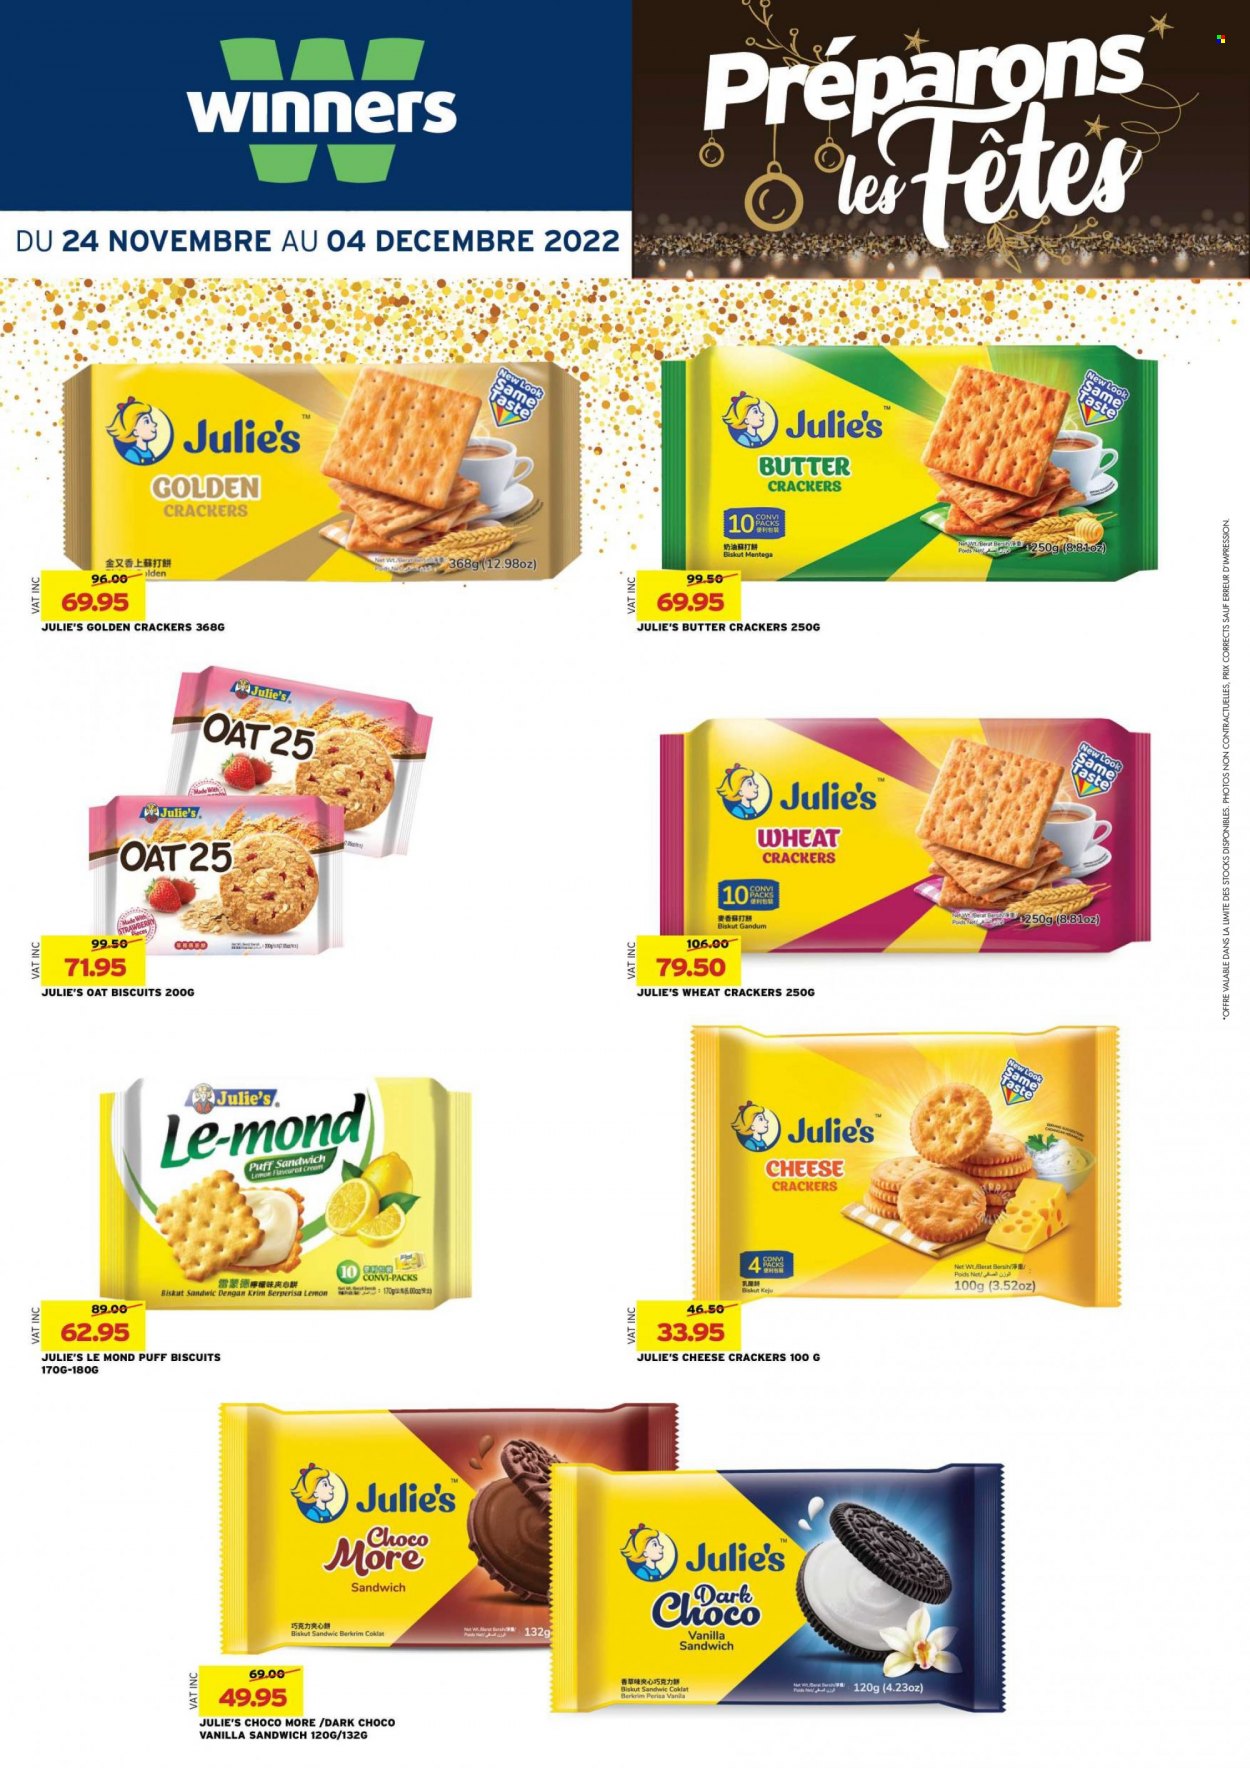 thumbnail - Winner's Catalogue - 24.11.2022 - 4.12.2022 - Sales products - sandwich, butter, crackers, biscuit, Julie's, oats. Page 24.